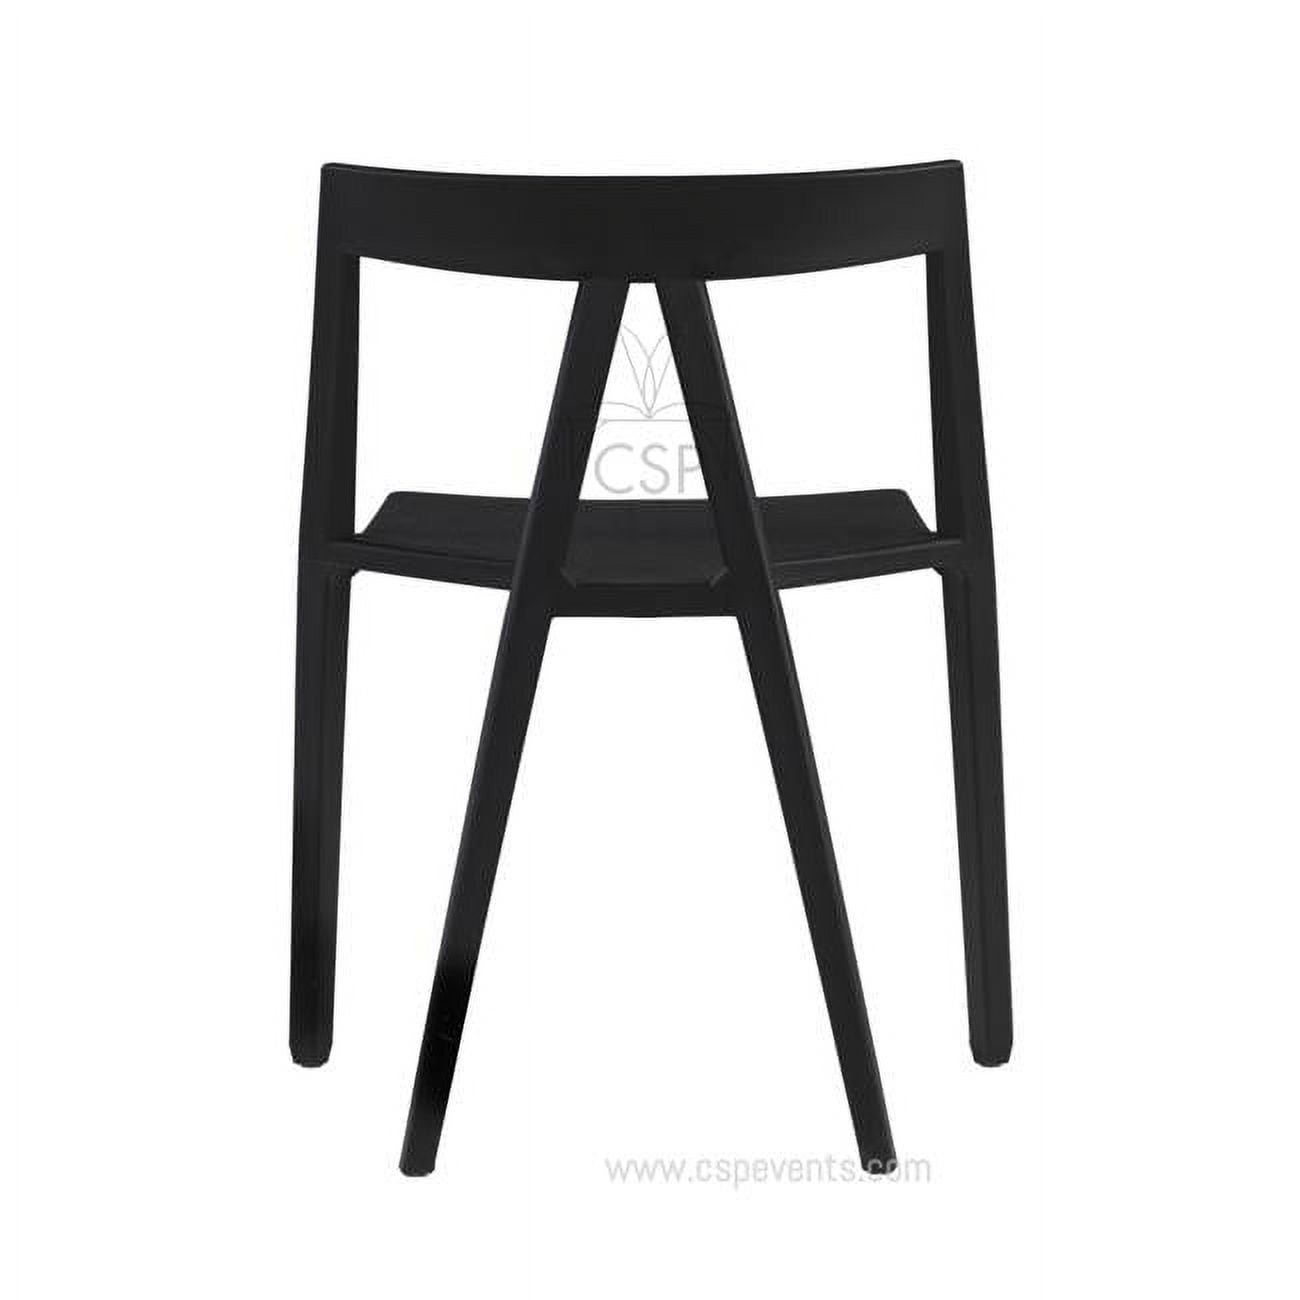 Picture of Commercial Seating Products RPP-MILAN-Blk-4 Milan Resin Polypropylene Stackable Event Chair  Black - 29.5 in. - Set of 4